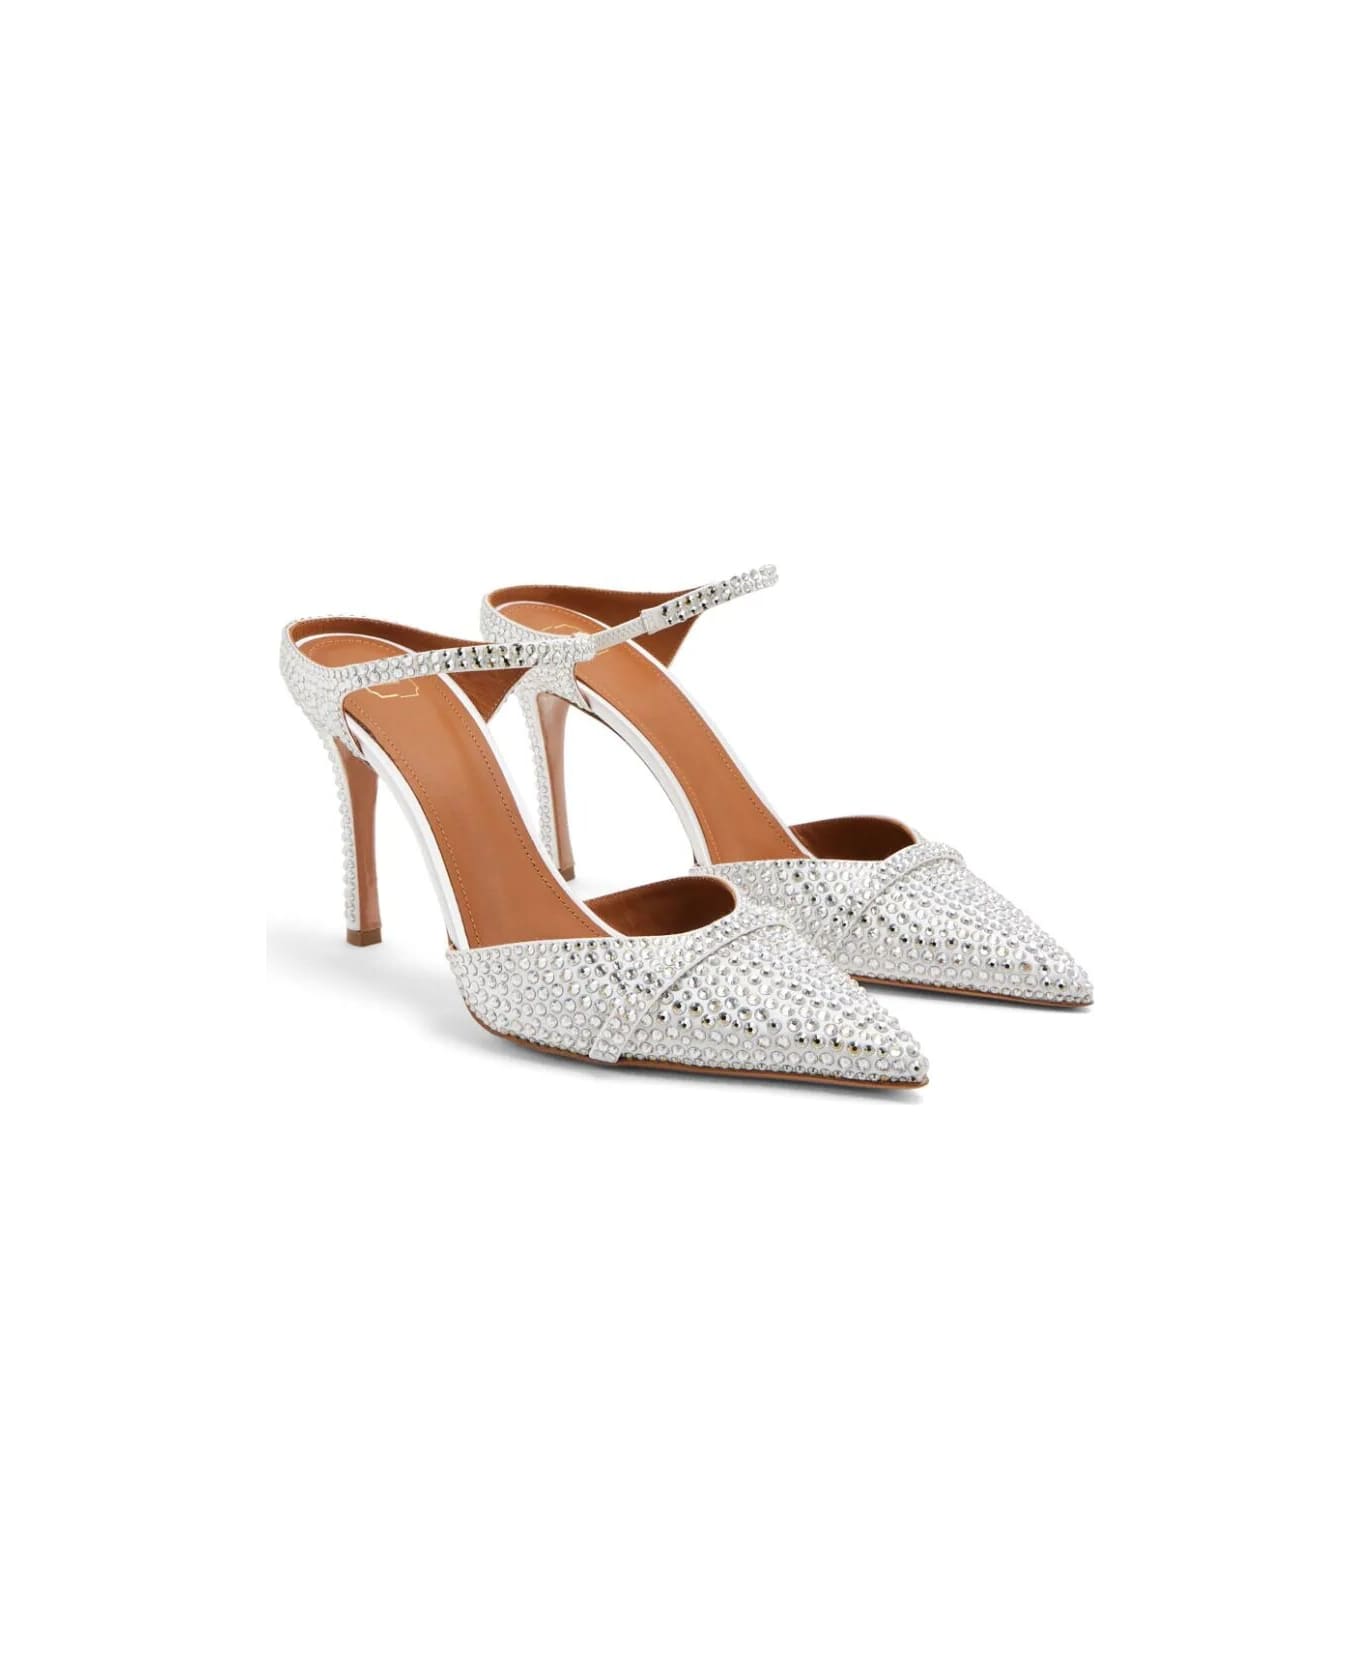 Malone Souliers Mules All Strass - White White